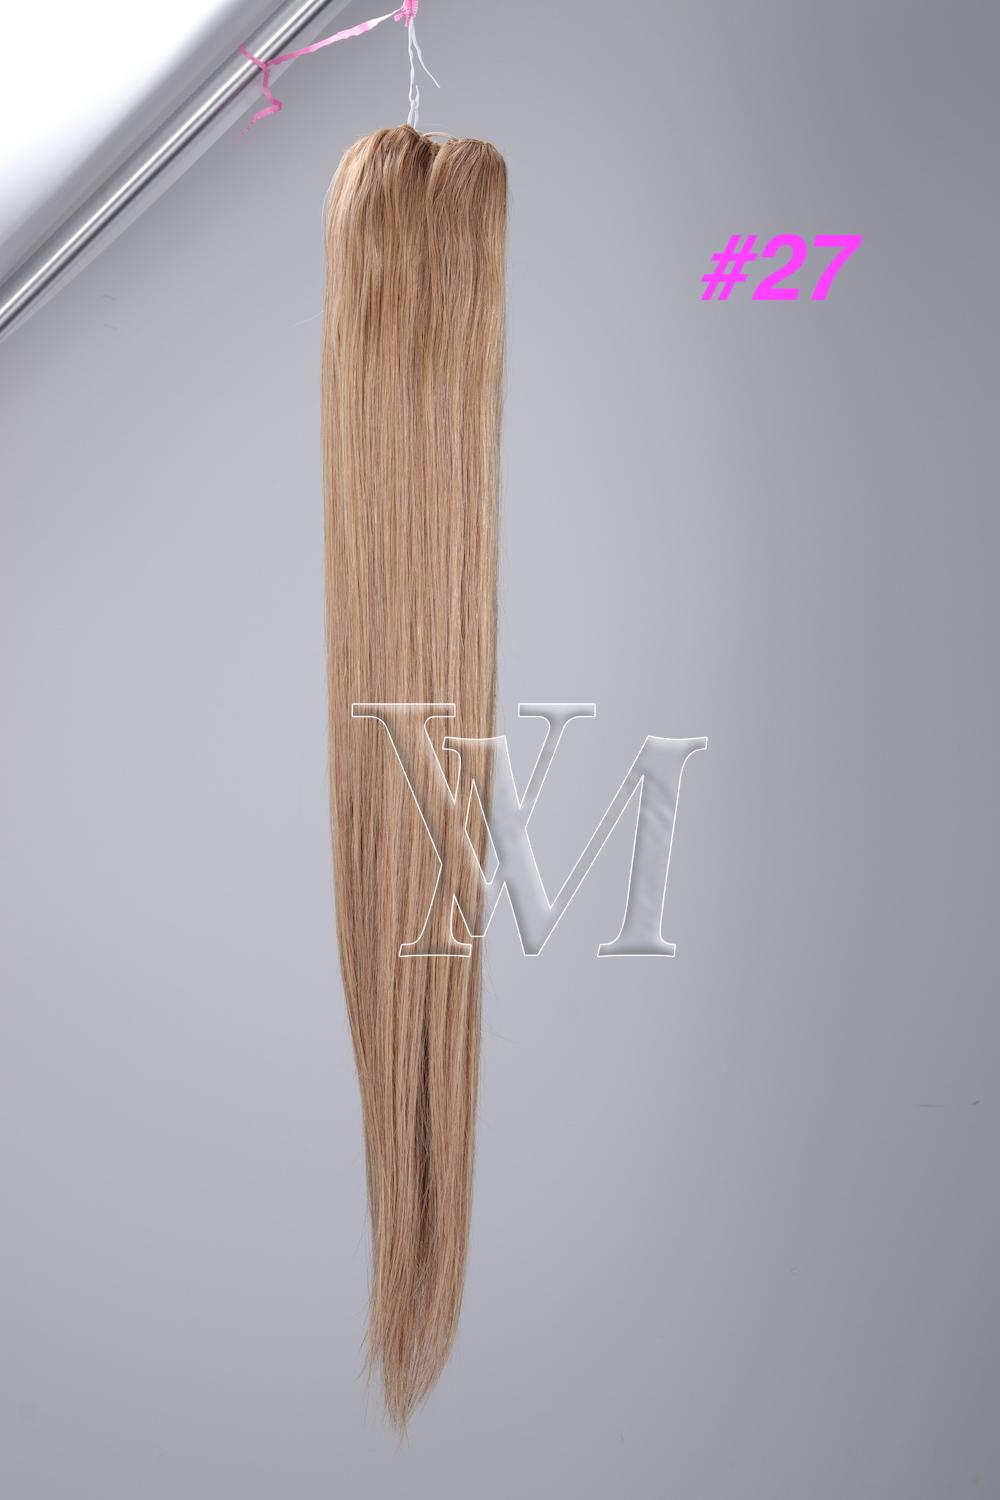 Blonde Virgin 160G Extensions Girls Hair Hair Drawn Wrap Magic Extensionssilky Straight No Shedding 12-26 Europeo Russo Brasile Capelli umani